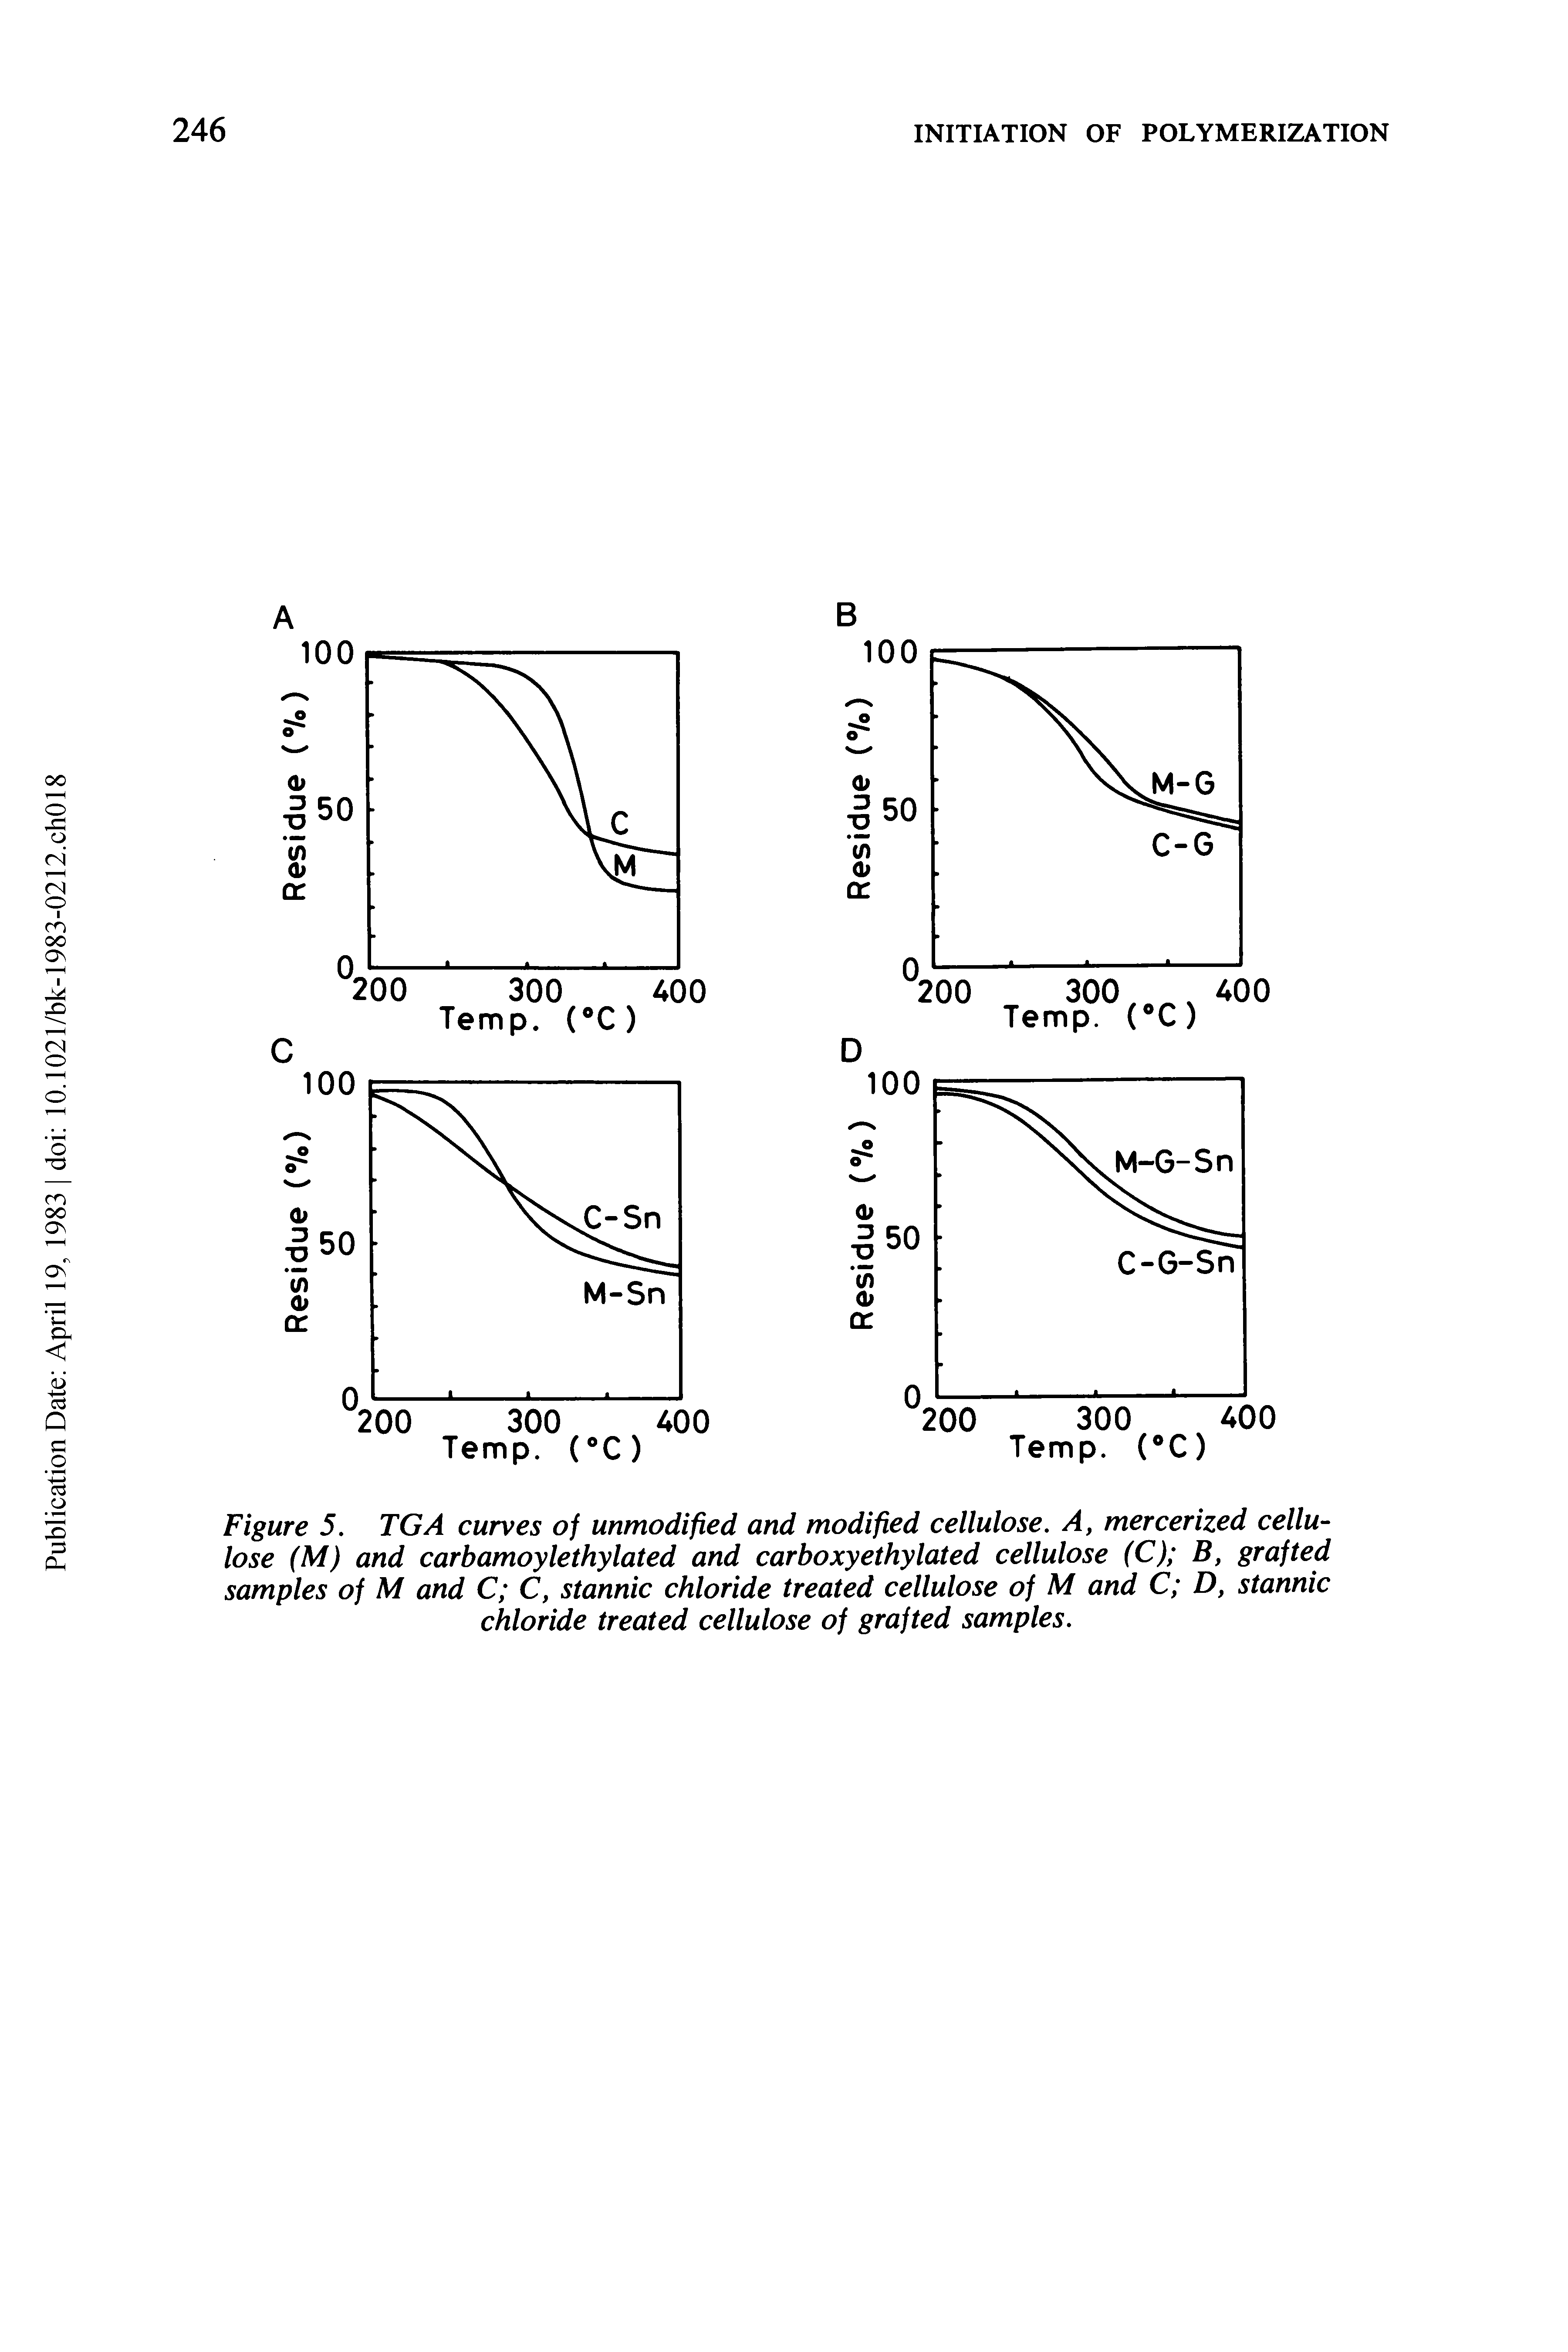 Figure 5. TGA curves of unmodified and modified cellulose. A, mercerized cellulose (M) and carbamoylethylated and carboxyethylated cellulose (C) B, grafted samples of M and C C, stannic chloride treated cellulose of M and C D, stannic chloride treated cellulose of grafted samples.